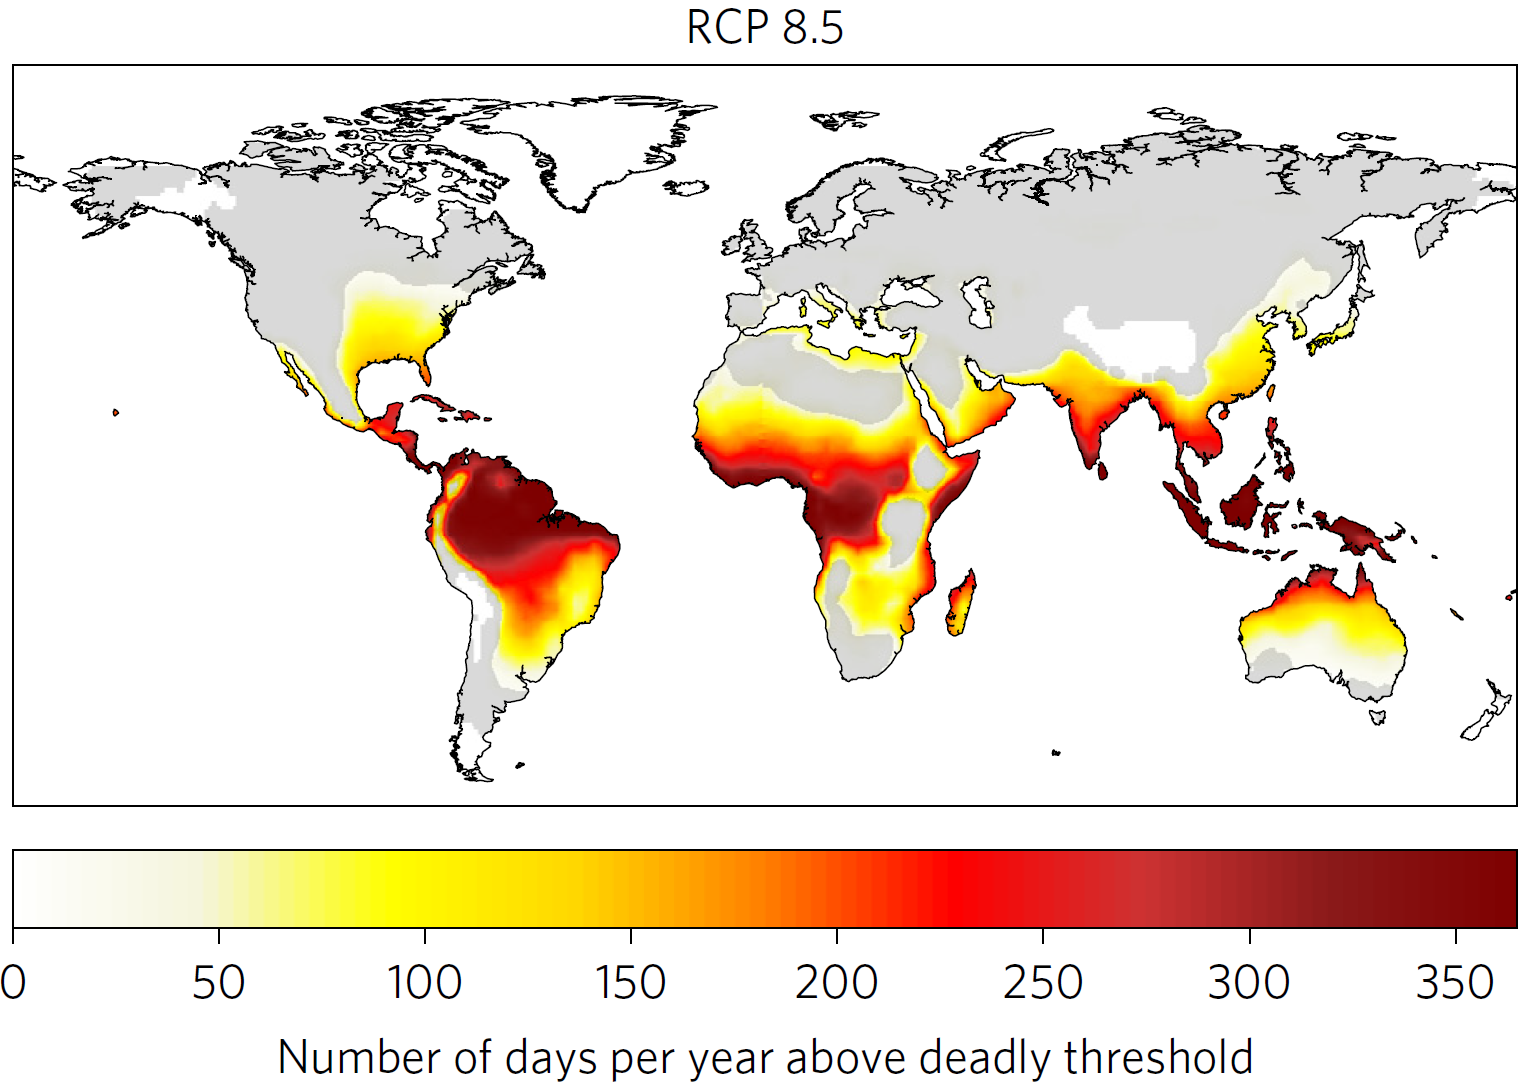 Number of days per year above deadly threshold in 2100 in scenario RCP 8.5